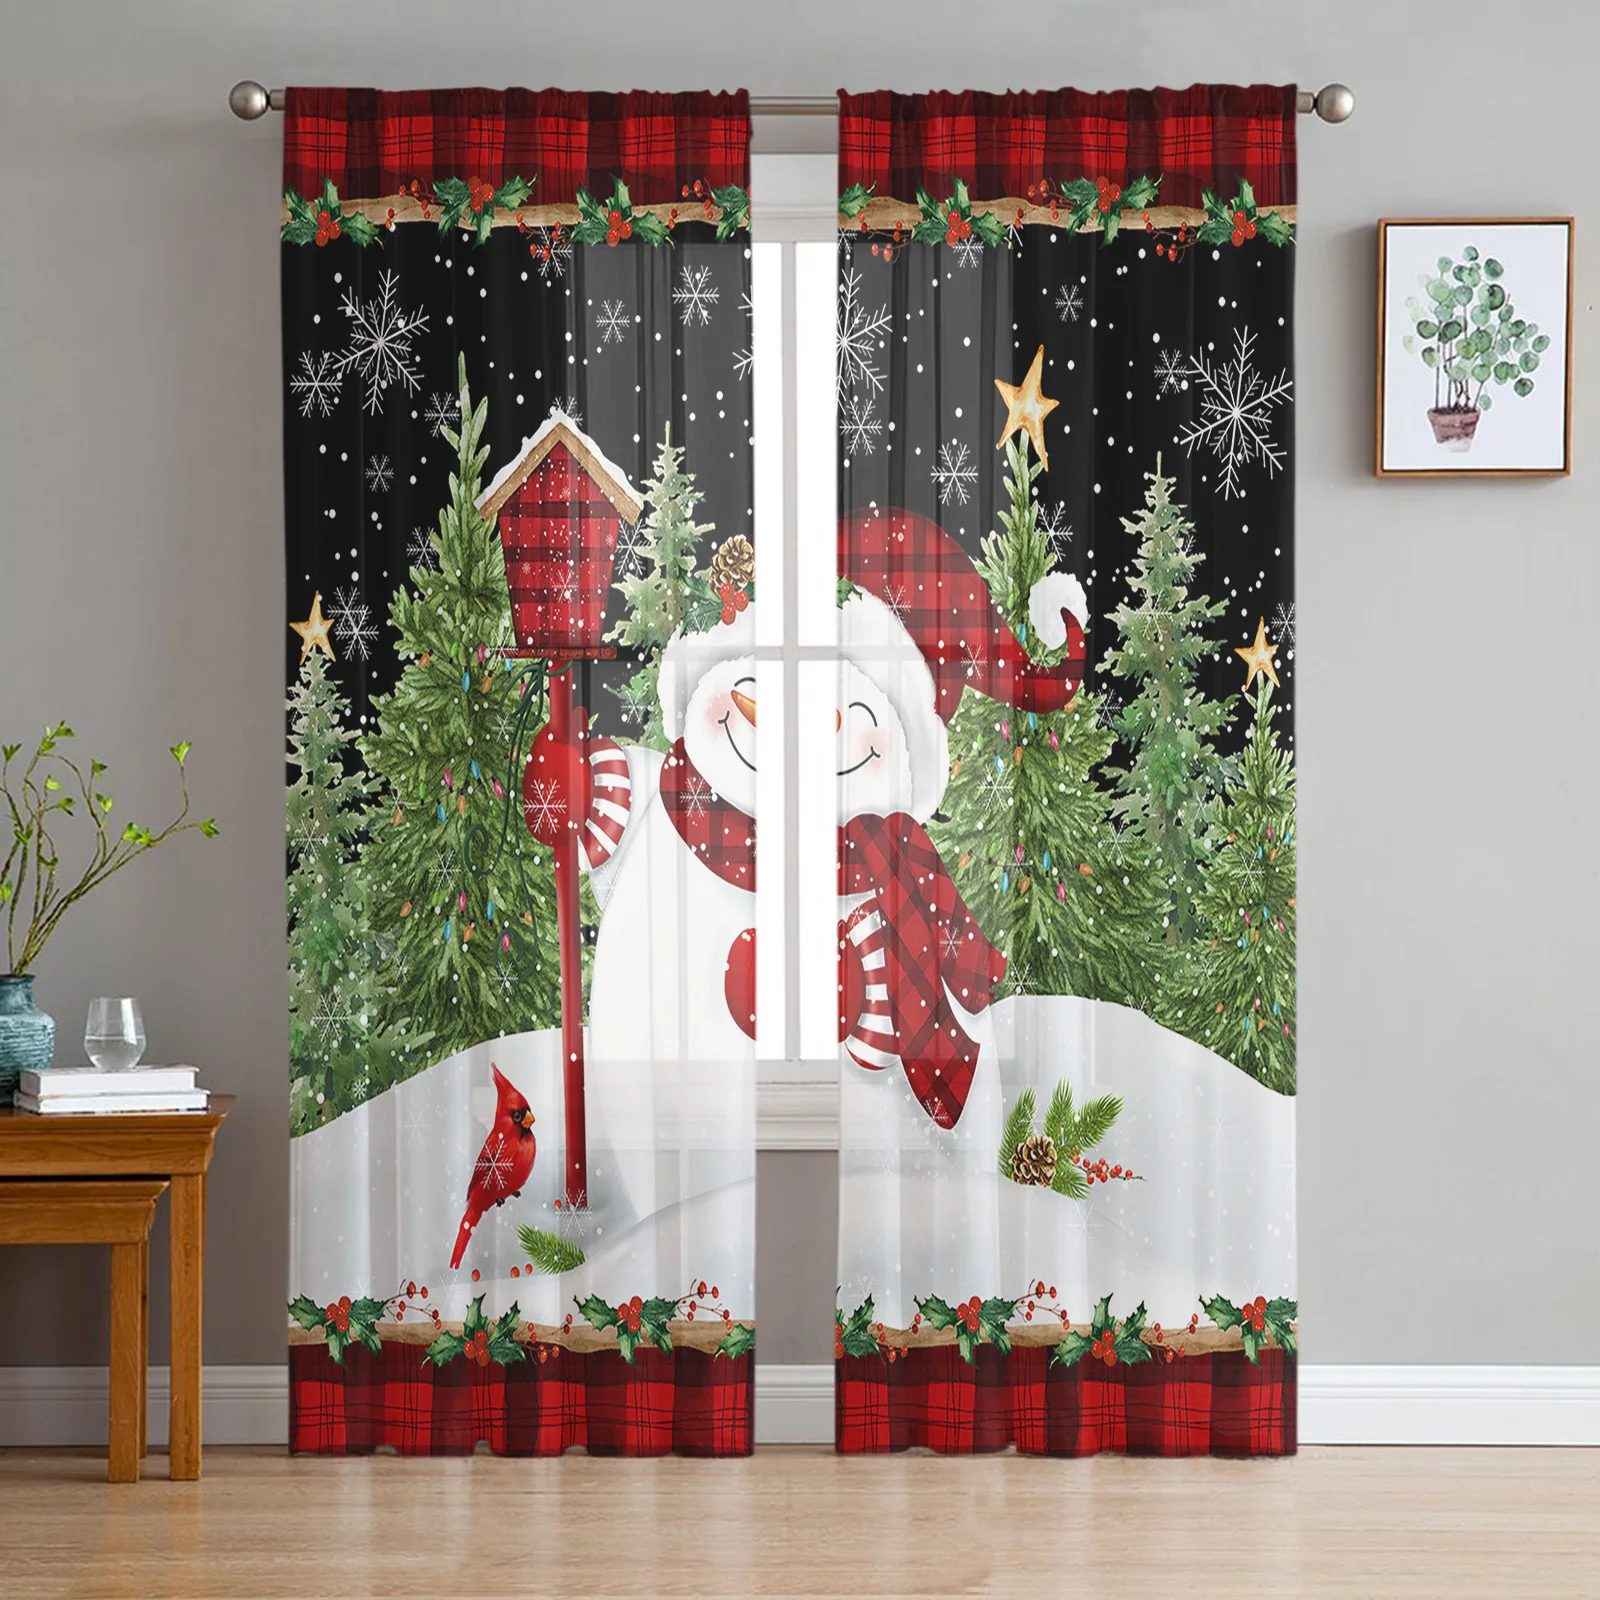 

Christmas Snowman Snowflake Sheer Curtains For Living Room Window Long Tulle Curtain Bedroom Kitchen Decoration Voile Drapes